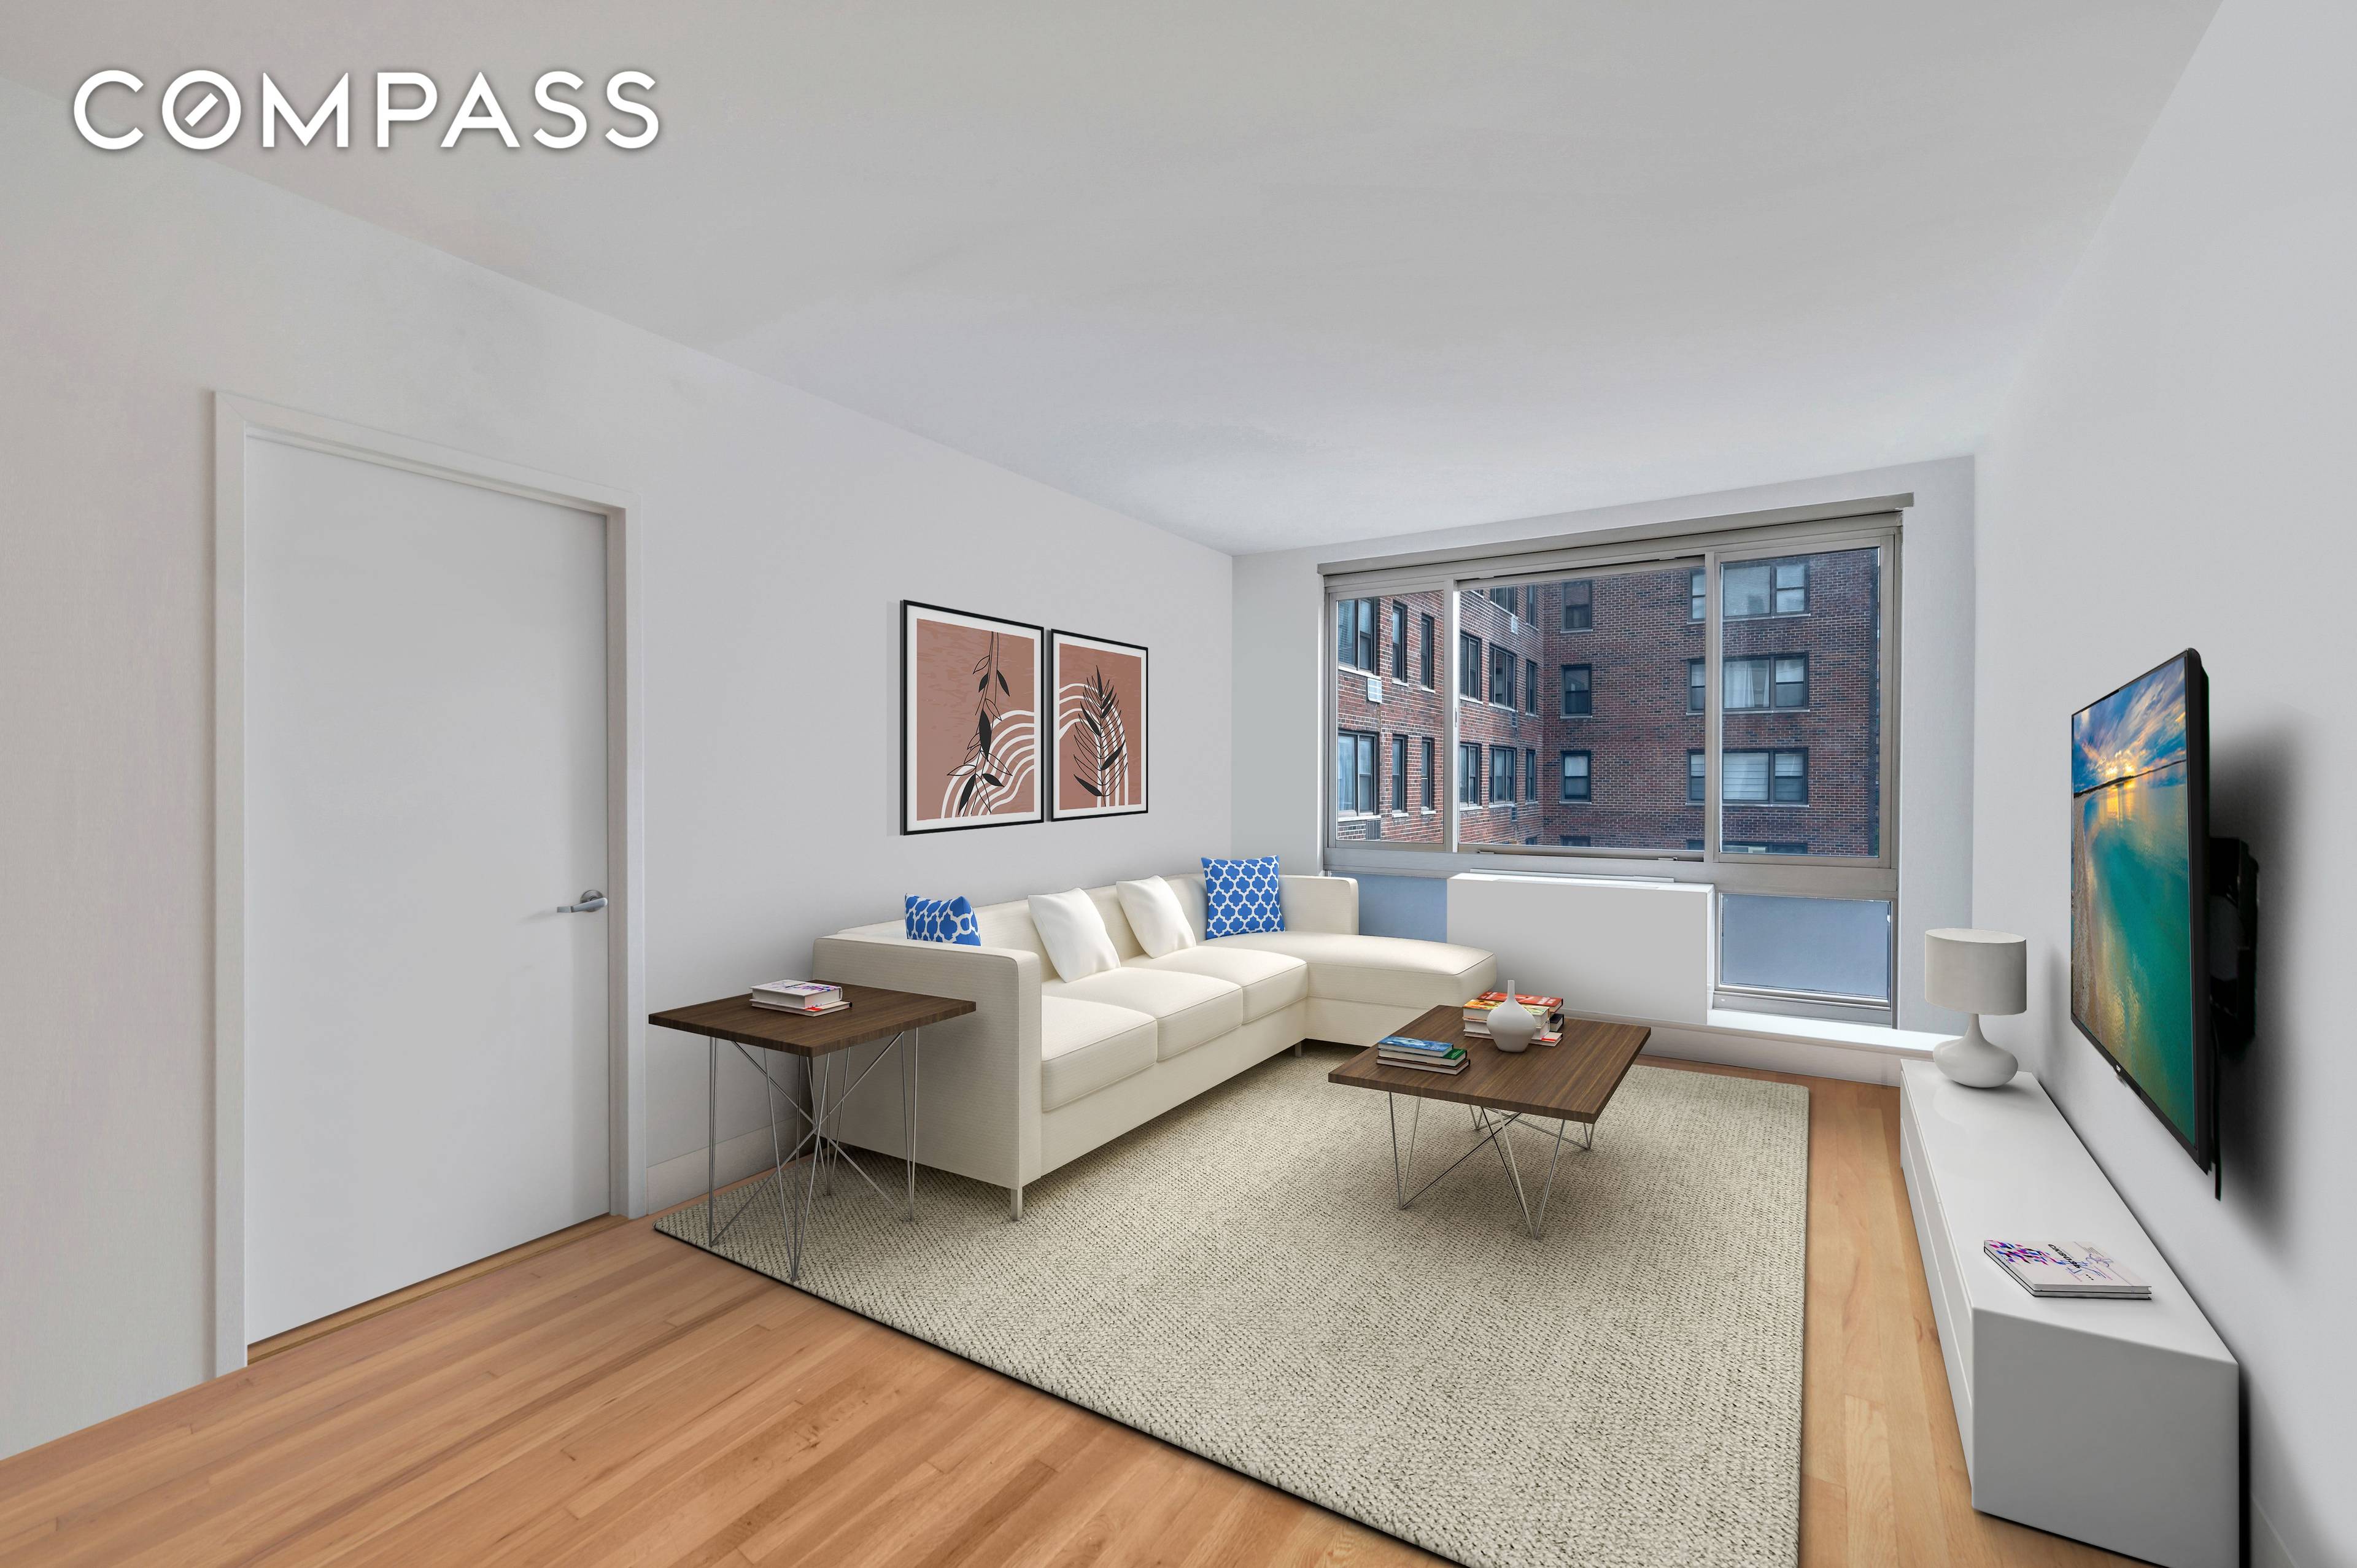 Situated in the highly sought after area at the intersection of Kips Bay and Gramercy, this modern and luxurious residence provides unmatched access to the best of city living.